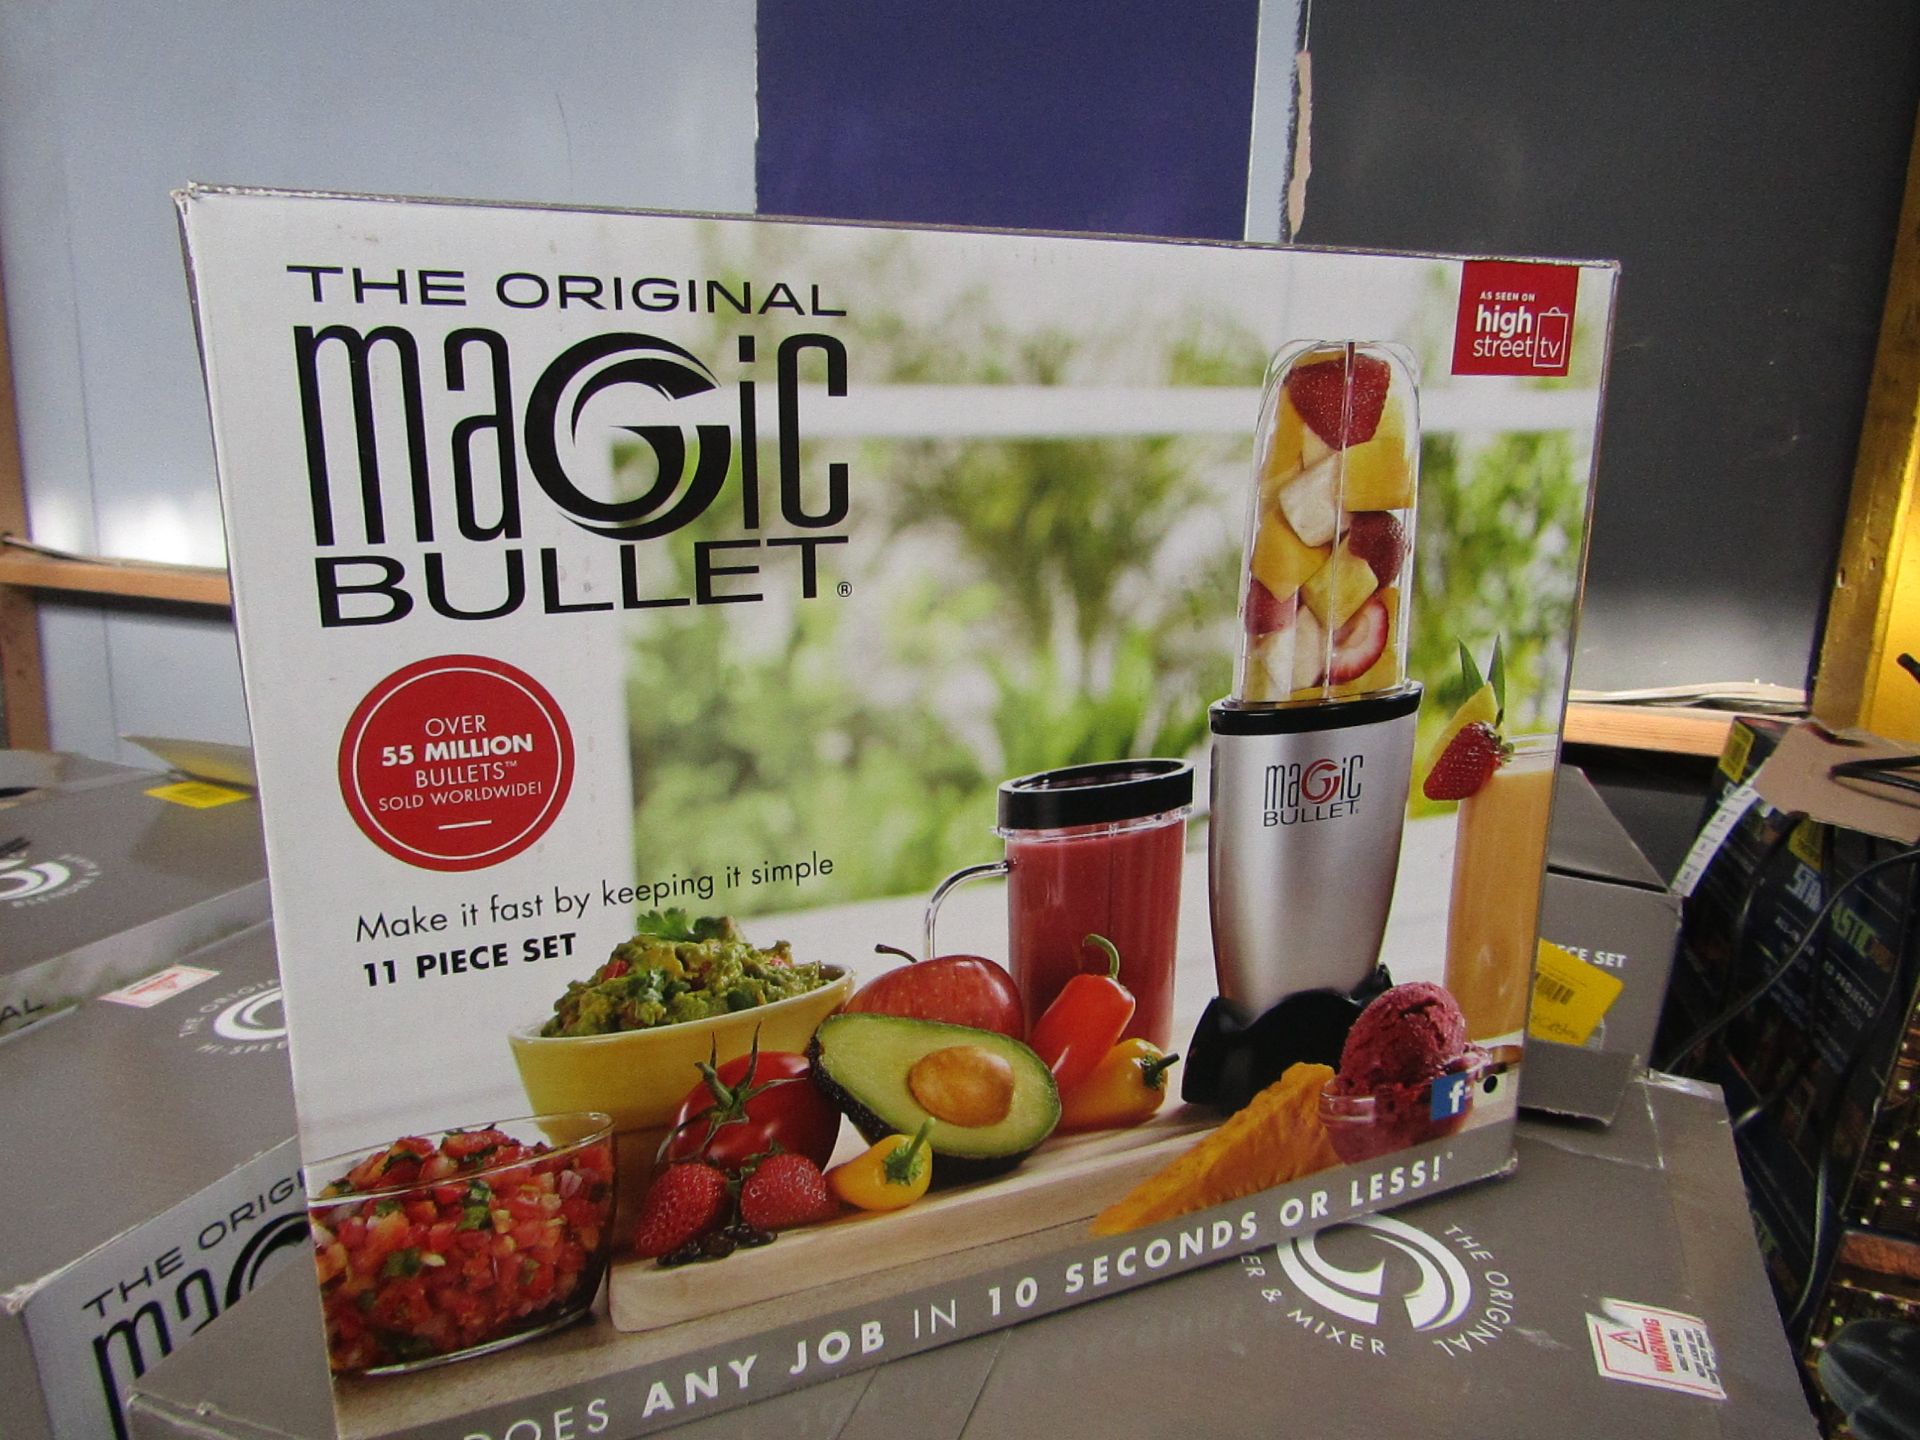 10X | MAGIC BULLET | UNTESTED AND BOXED | NO ONLINE RE-SALE | SKU C5060191467360 | RRP £39.99 |TOTAL